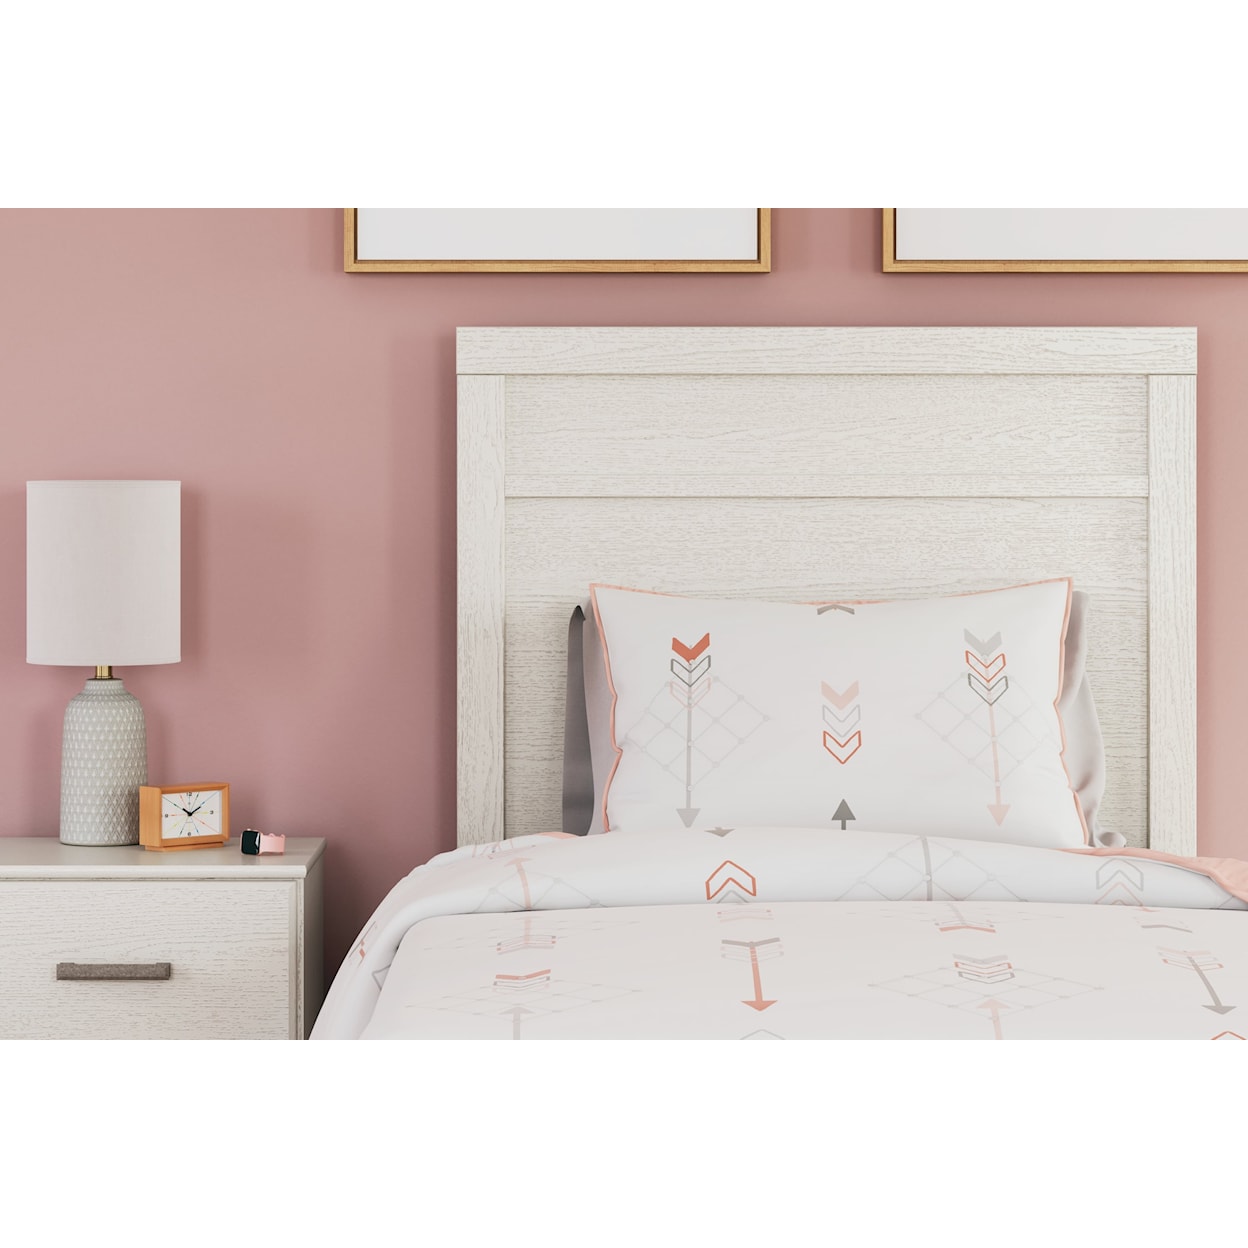 Signature Design by Ashley Stelsie Twin Panel Bed